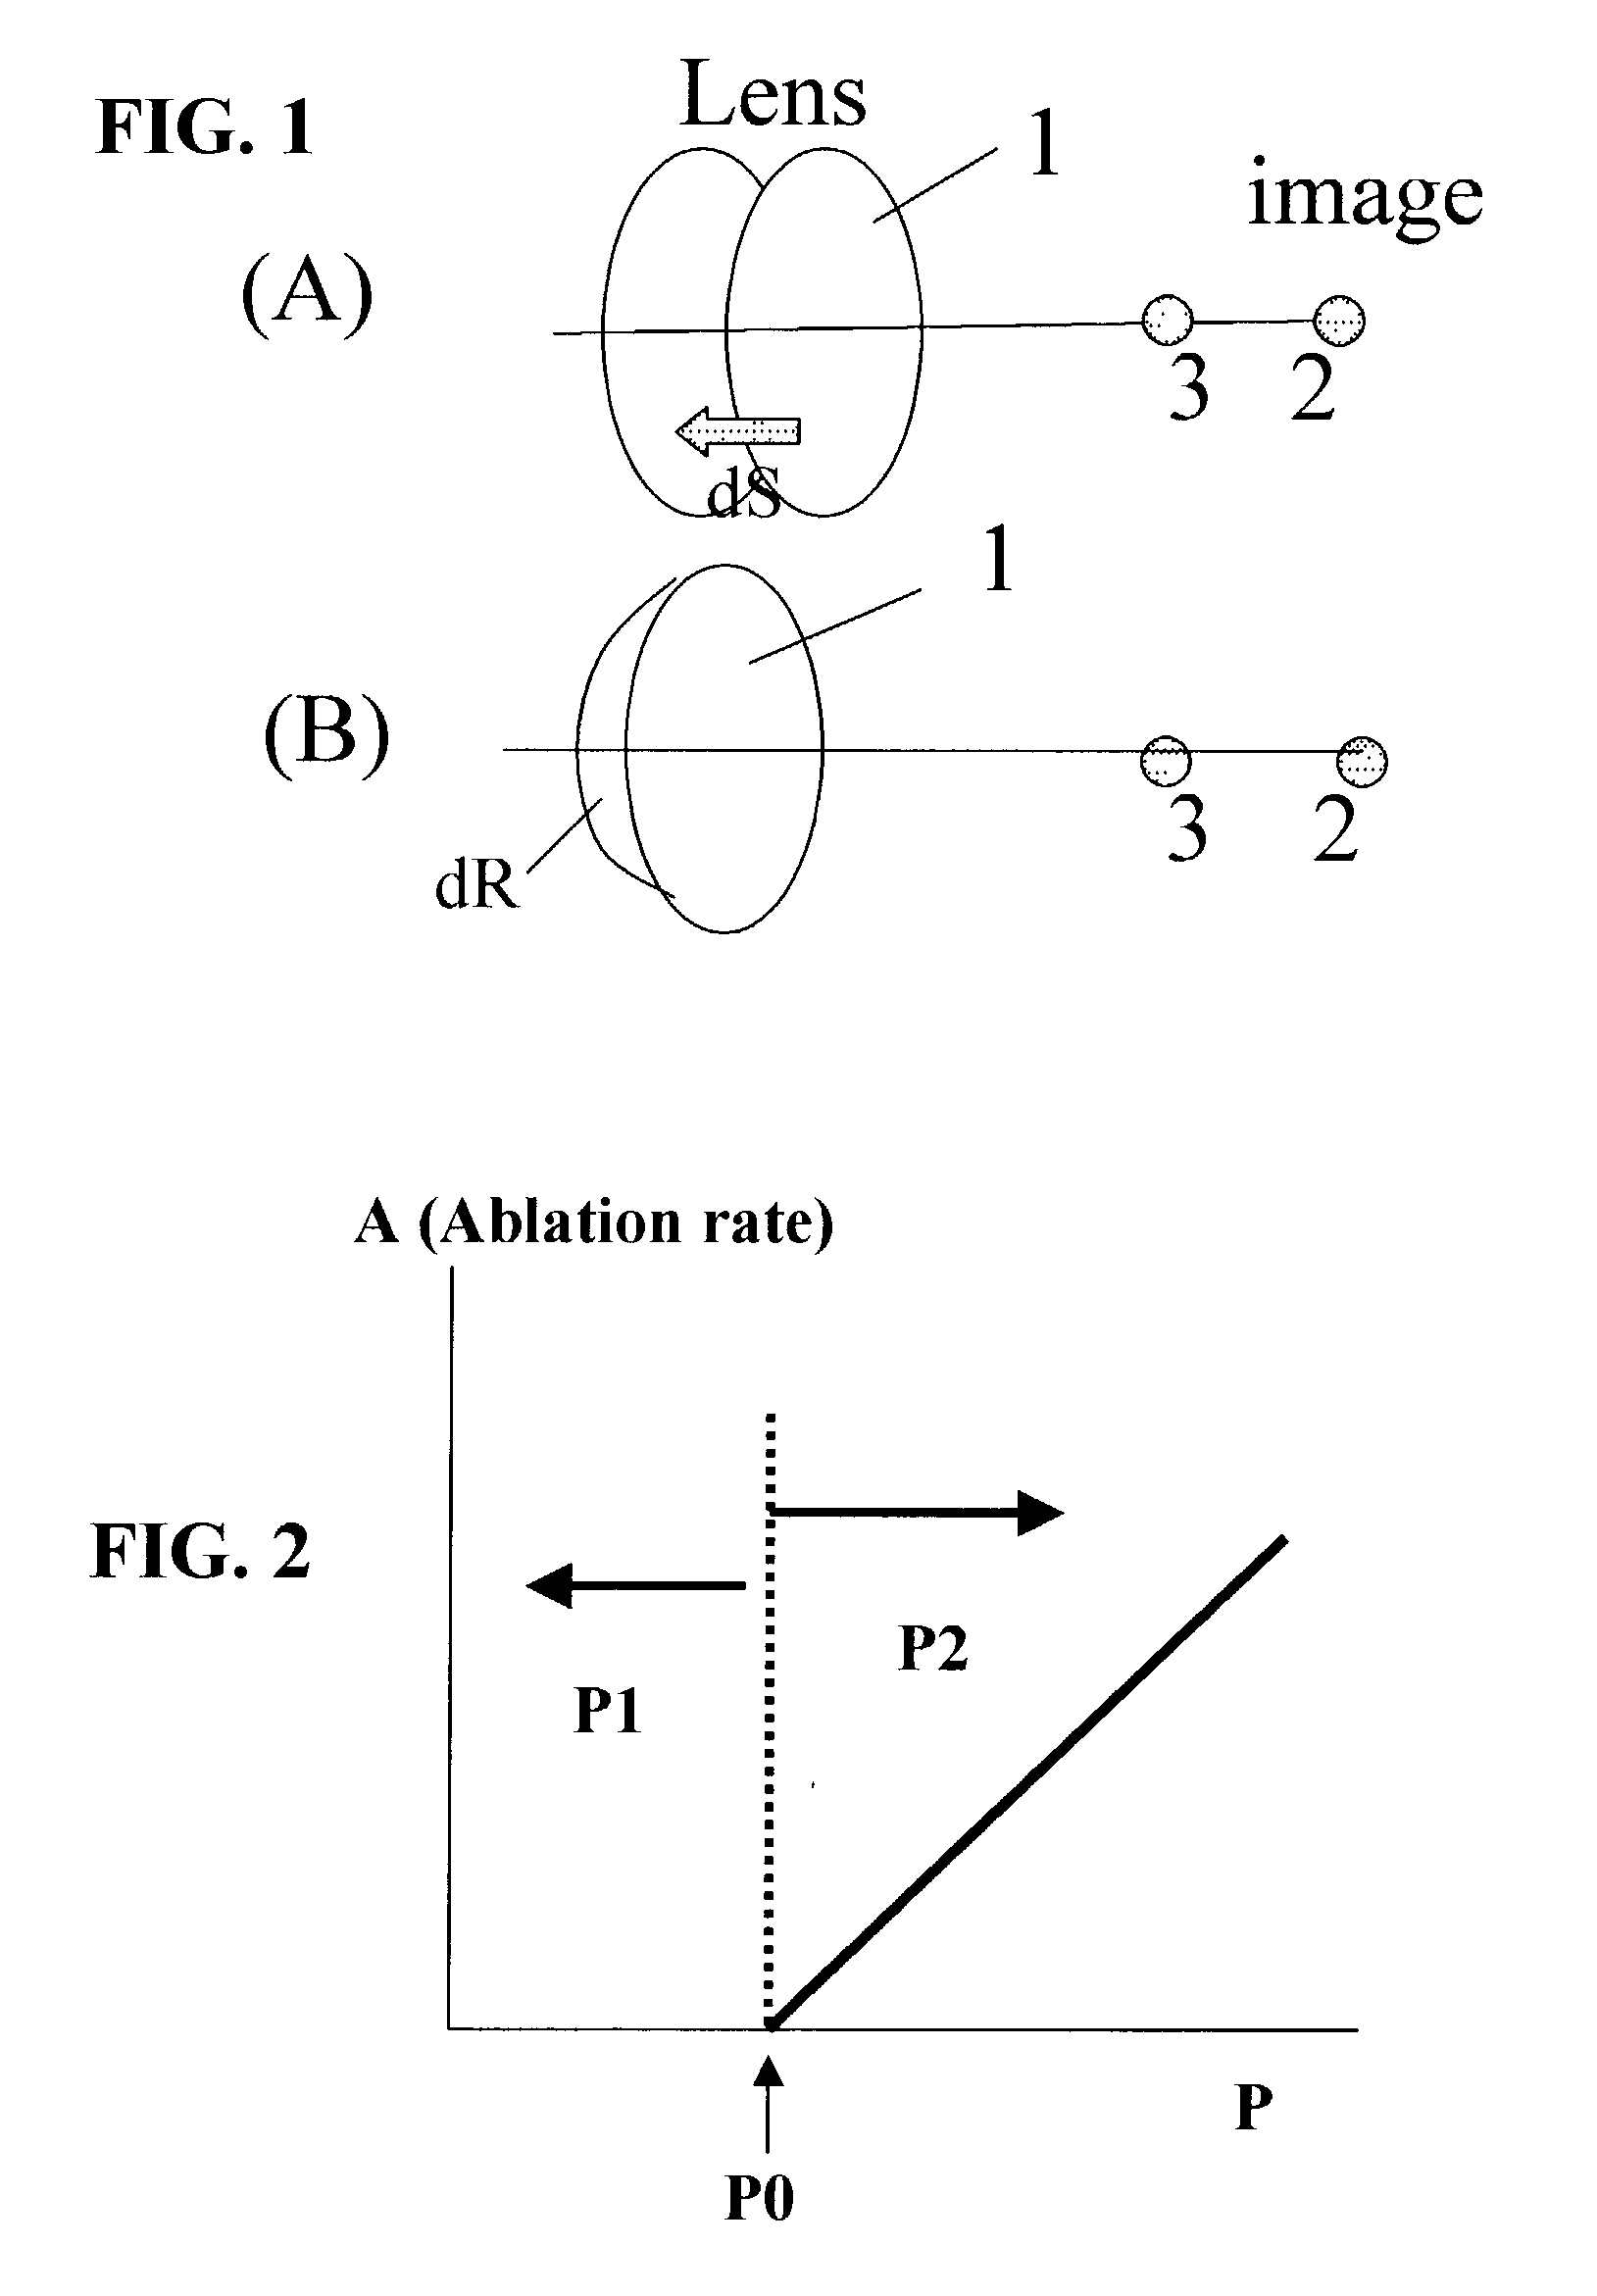 Methods and apparatus for presbyopia treatment using a dual-function laser system